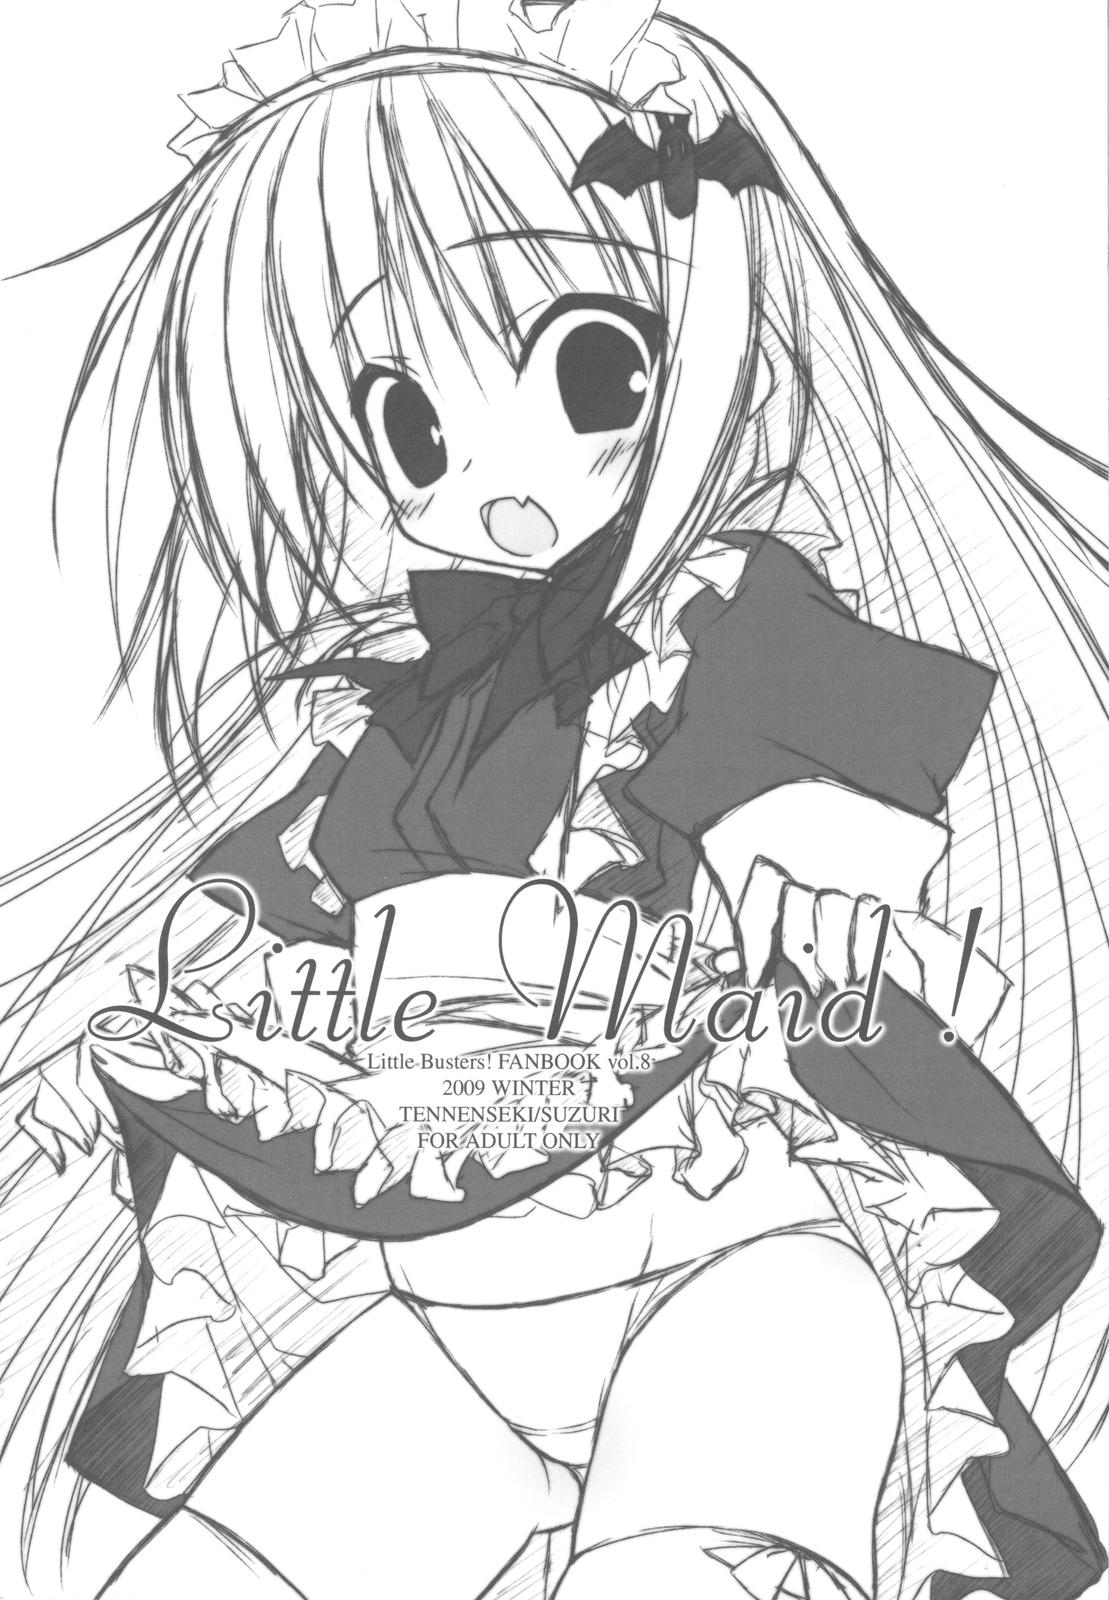 Cavalgando Little Maid! - Little busters Tattoo - Picture 1